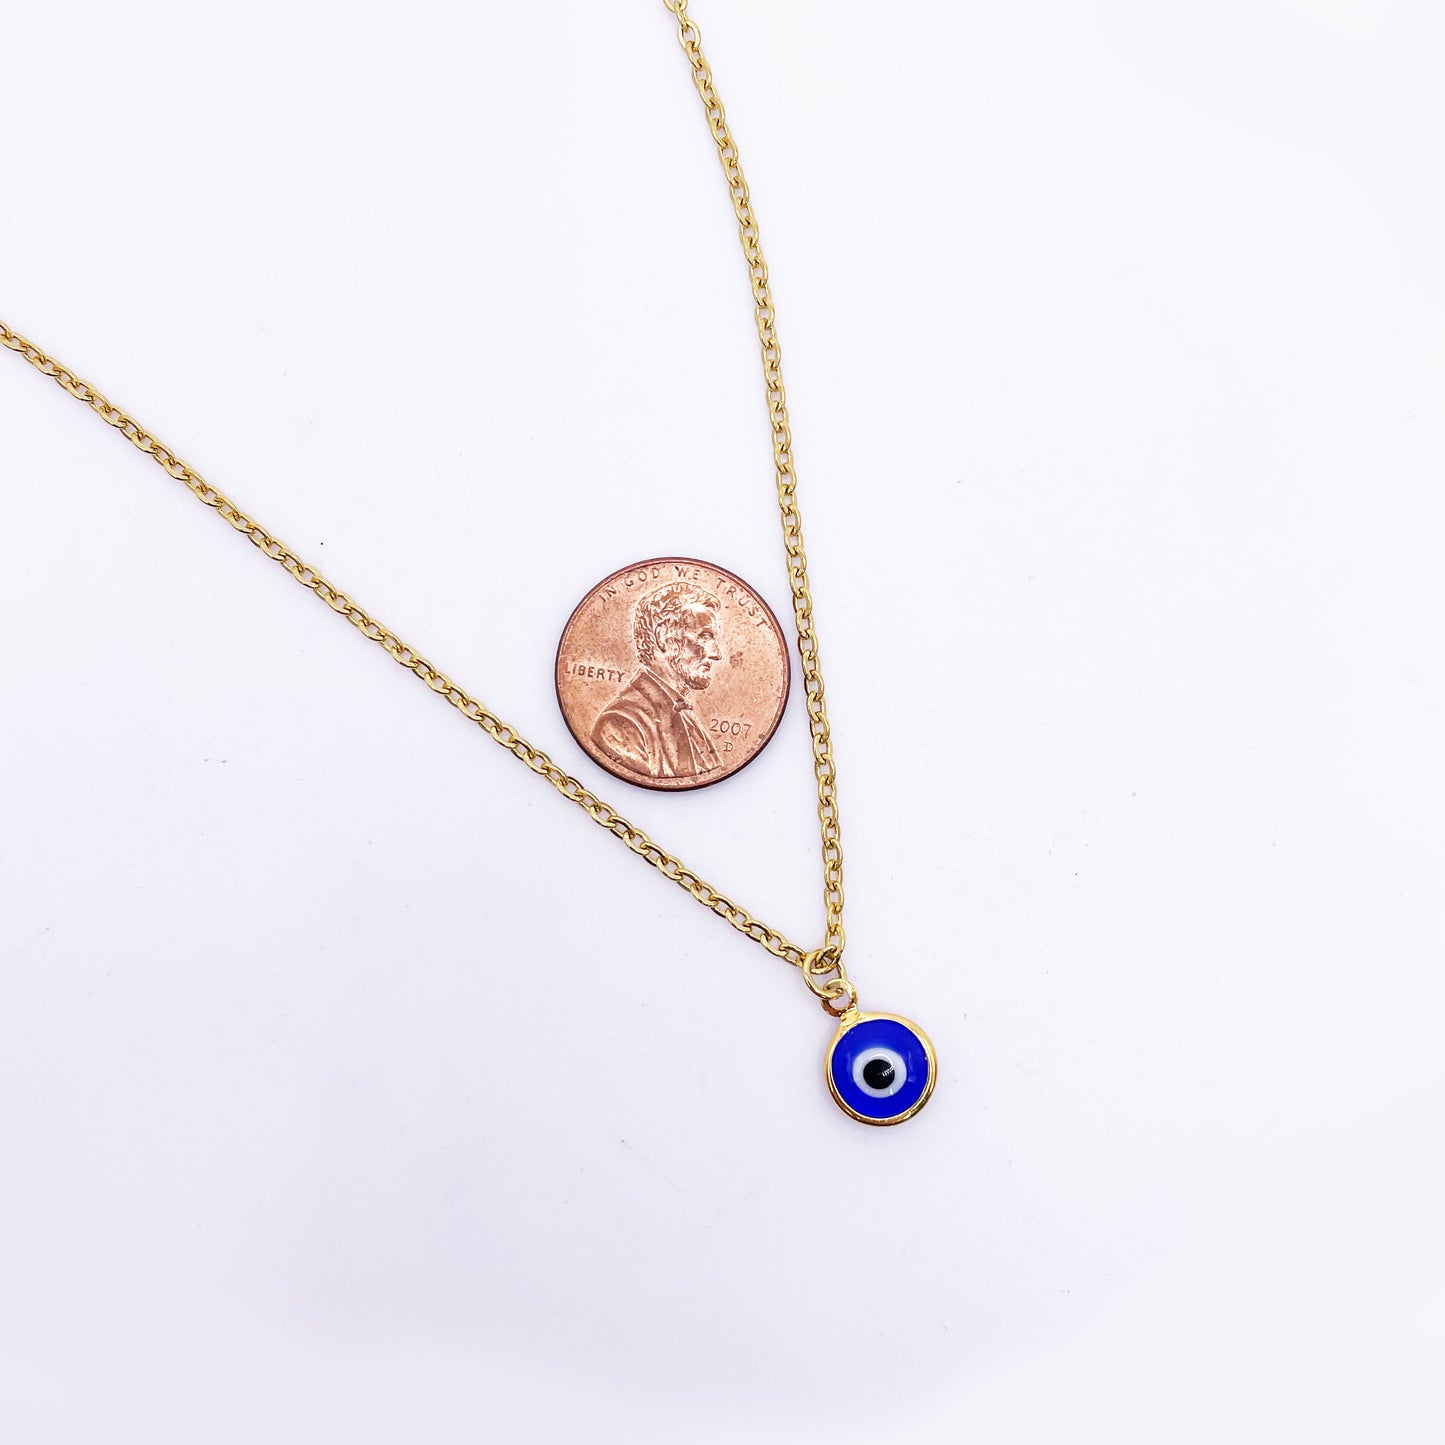 Blue Evil Eyes Necklace Stainless Steel 14K Gold Plated.